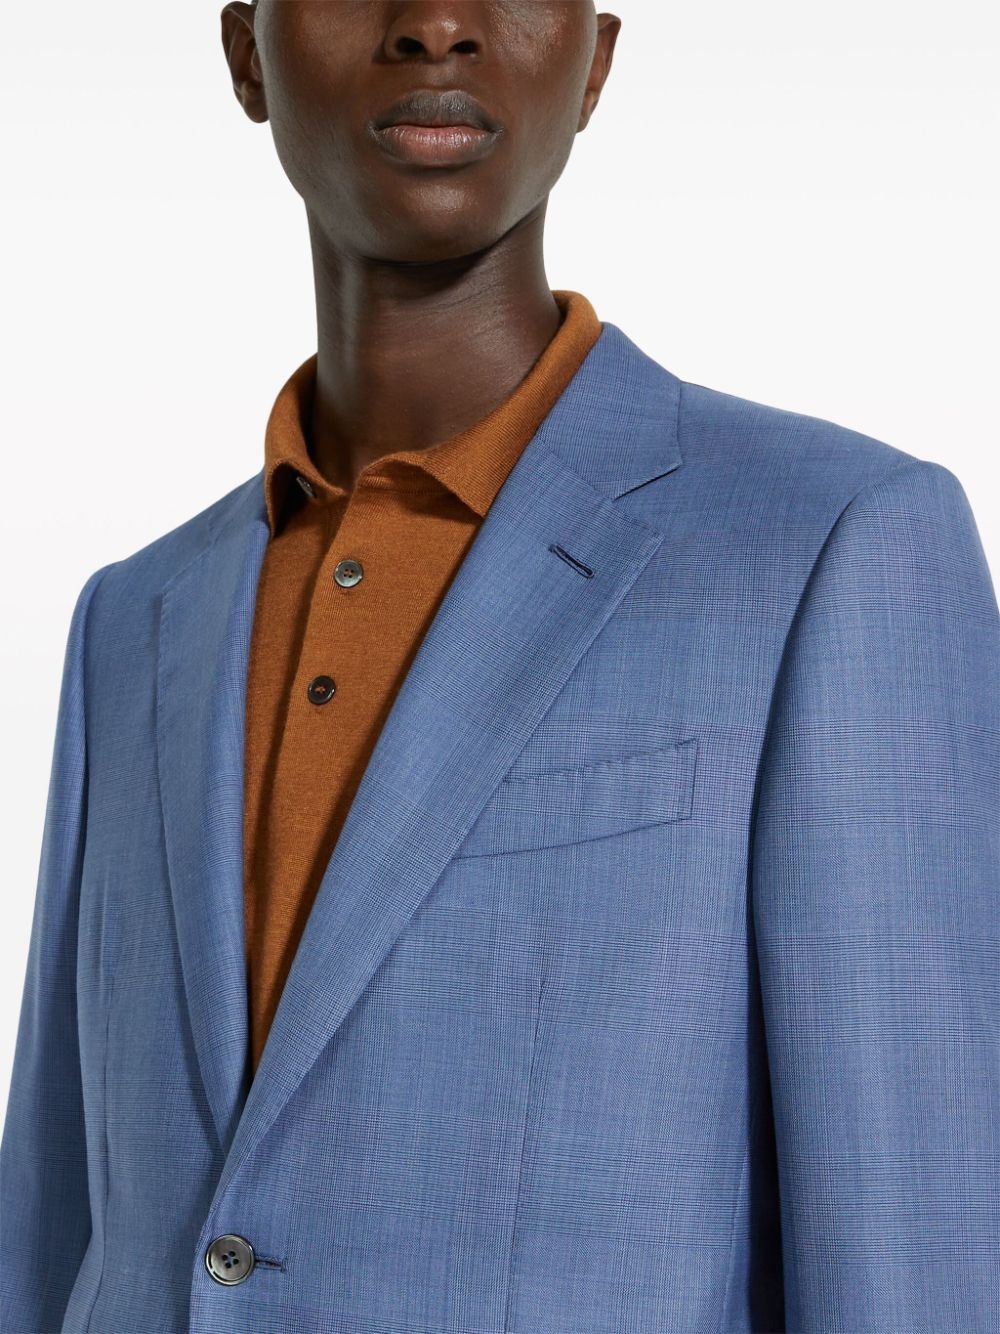 Centoventimila single-breasted wool suit - 4